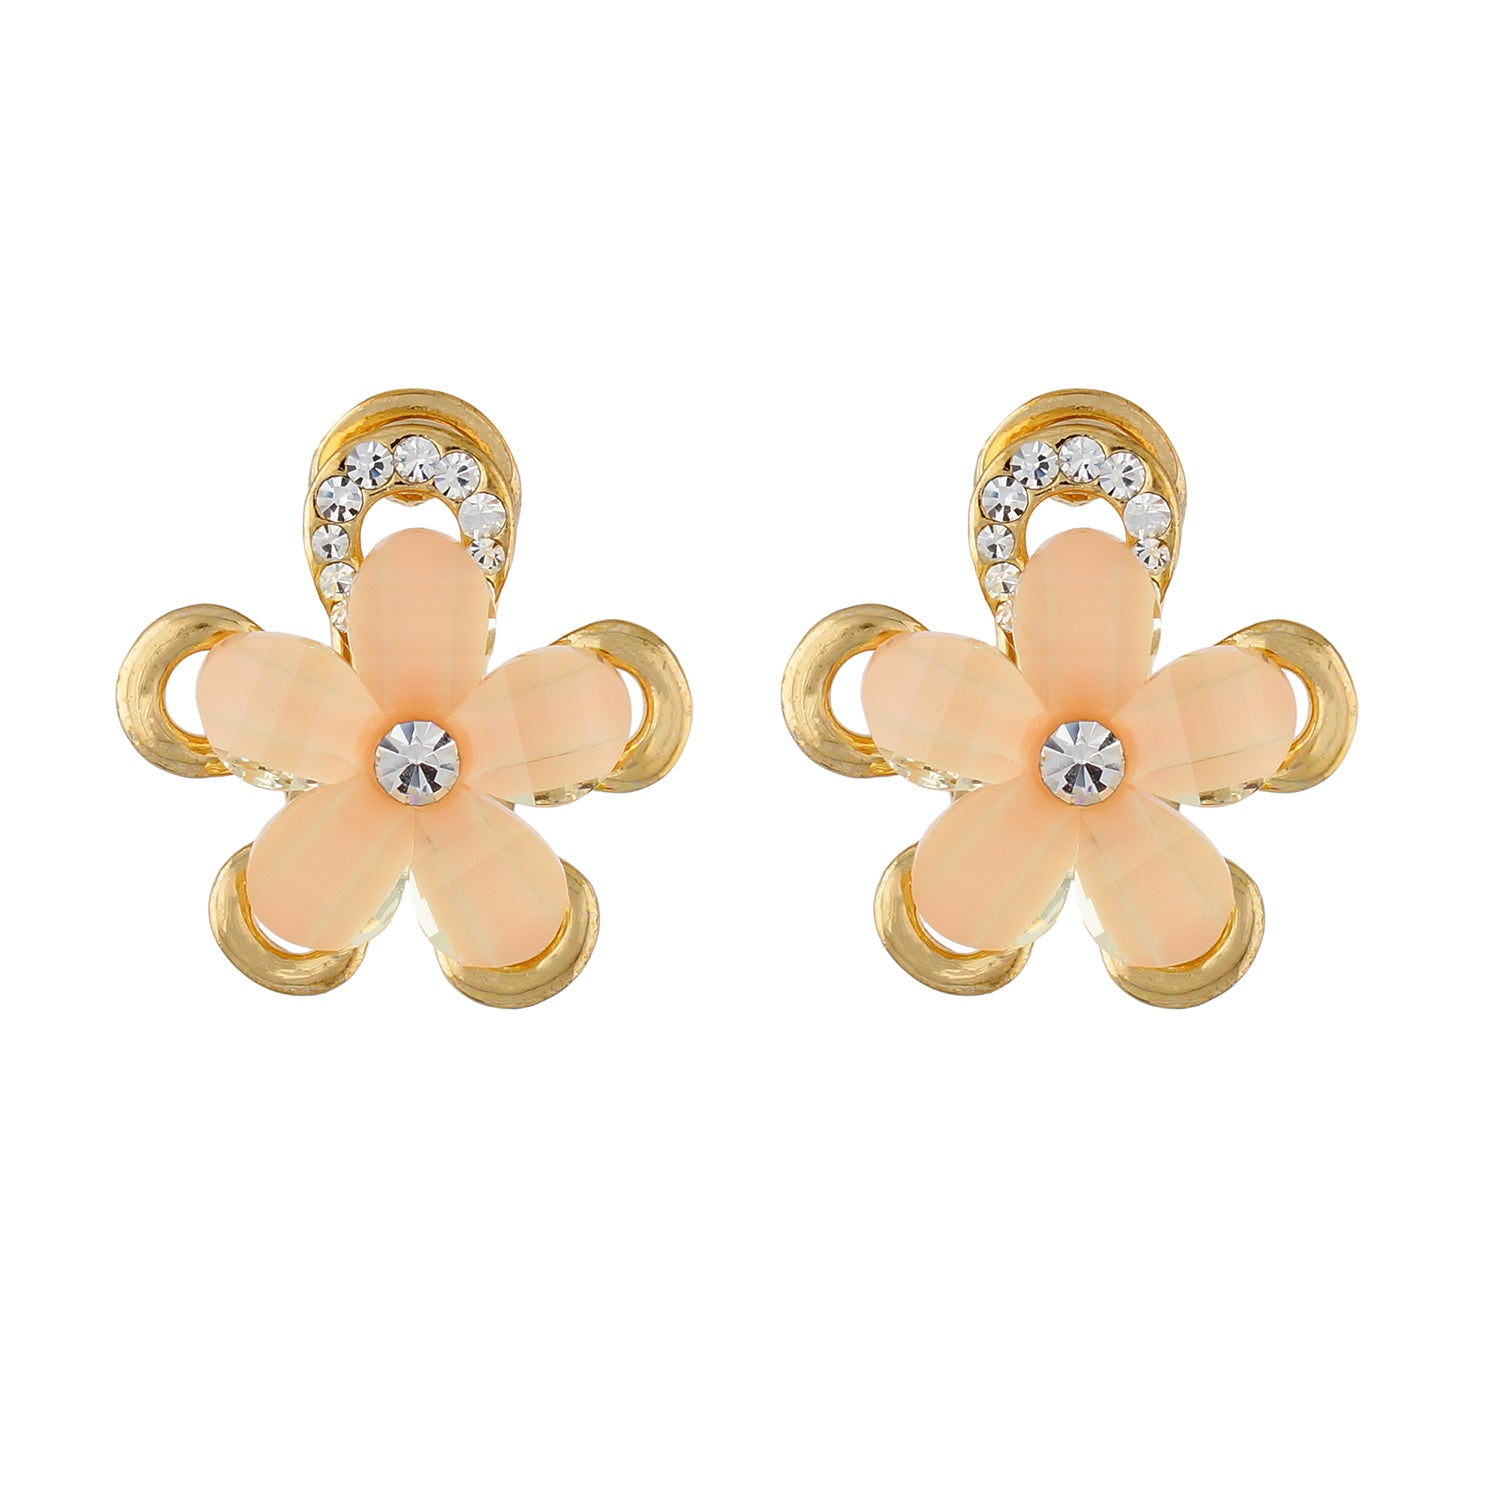 Fashionable Beige and Gold Colour Floral Design Earring for Girls and Women